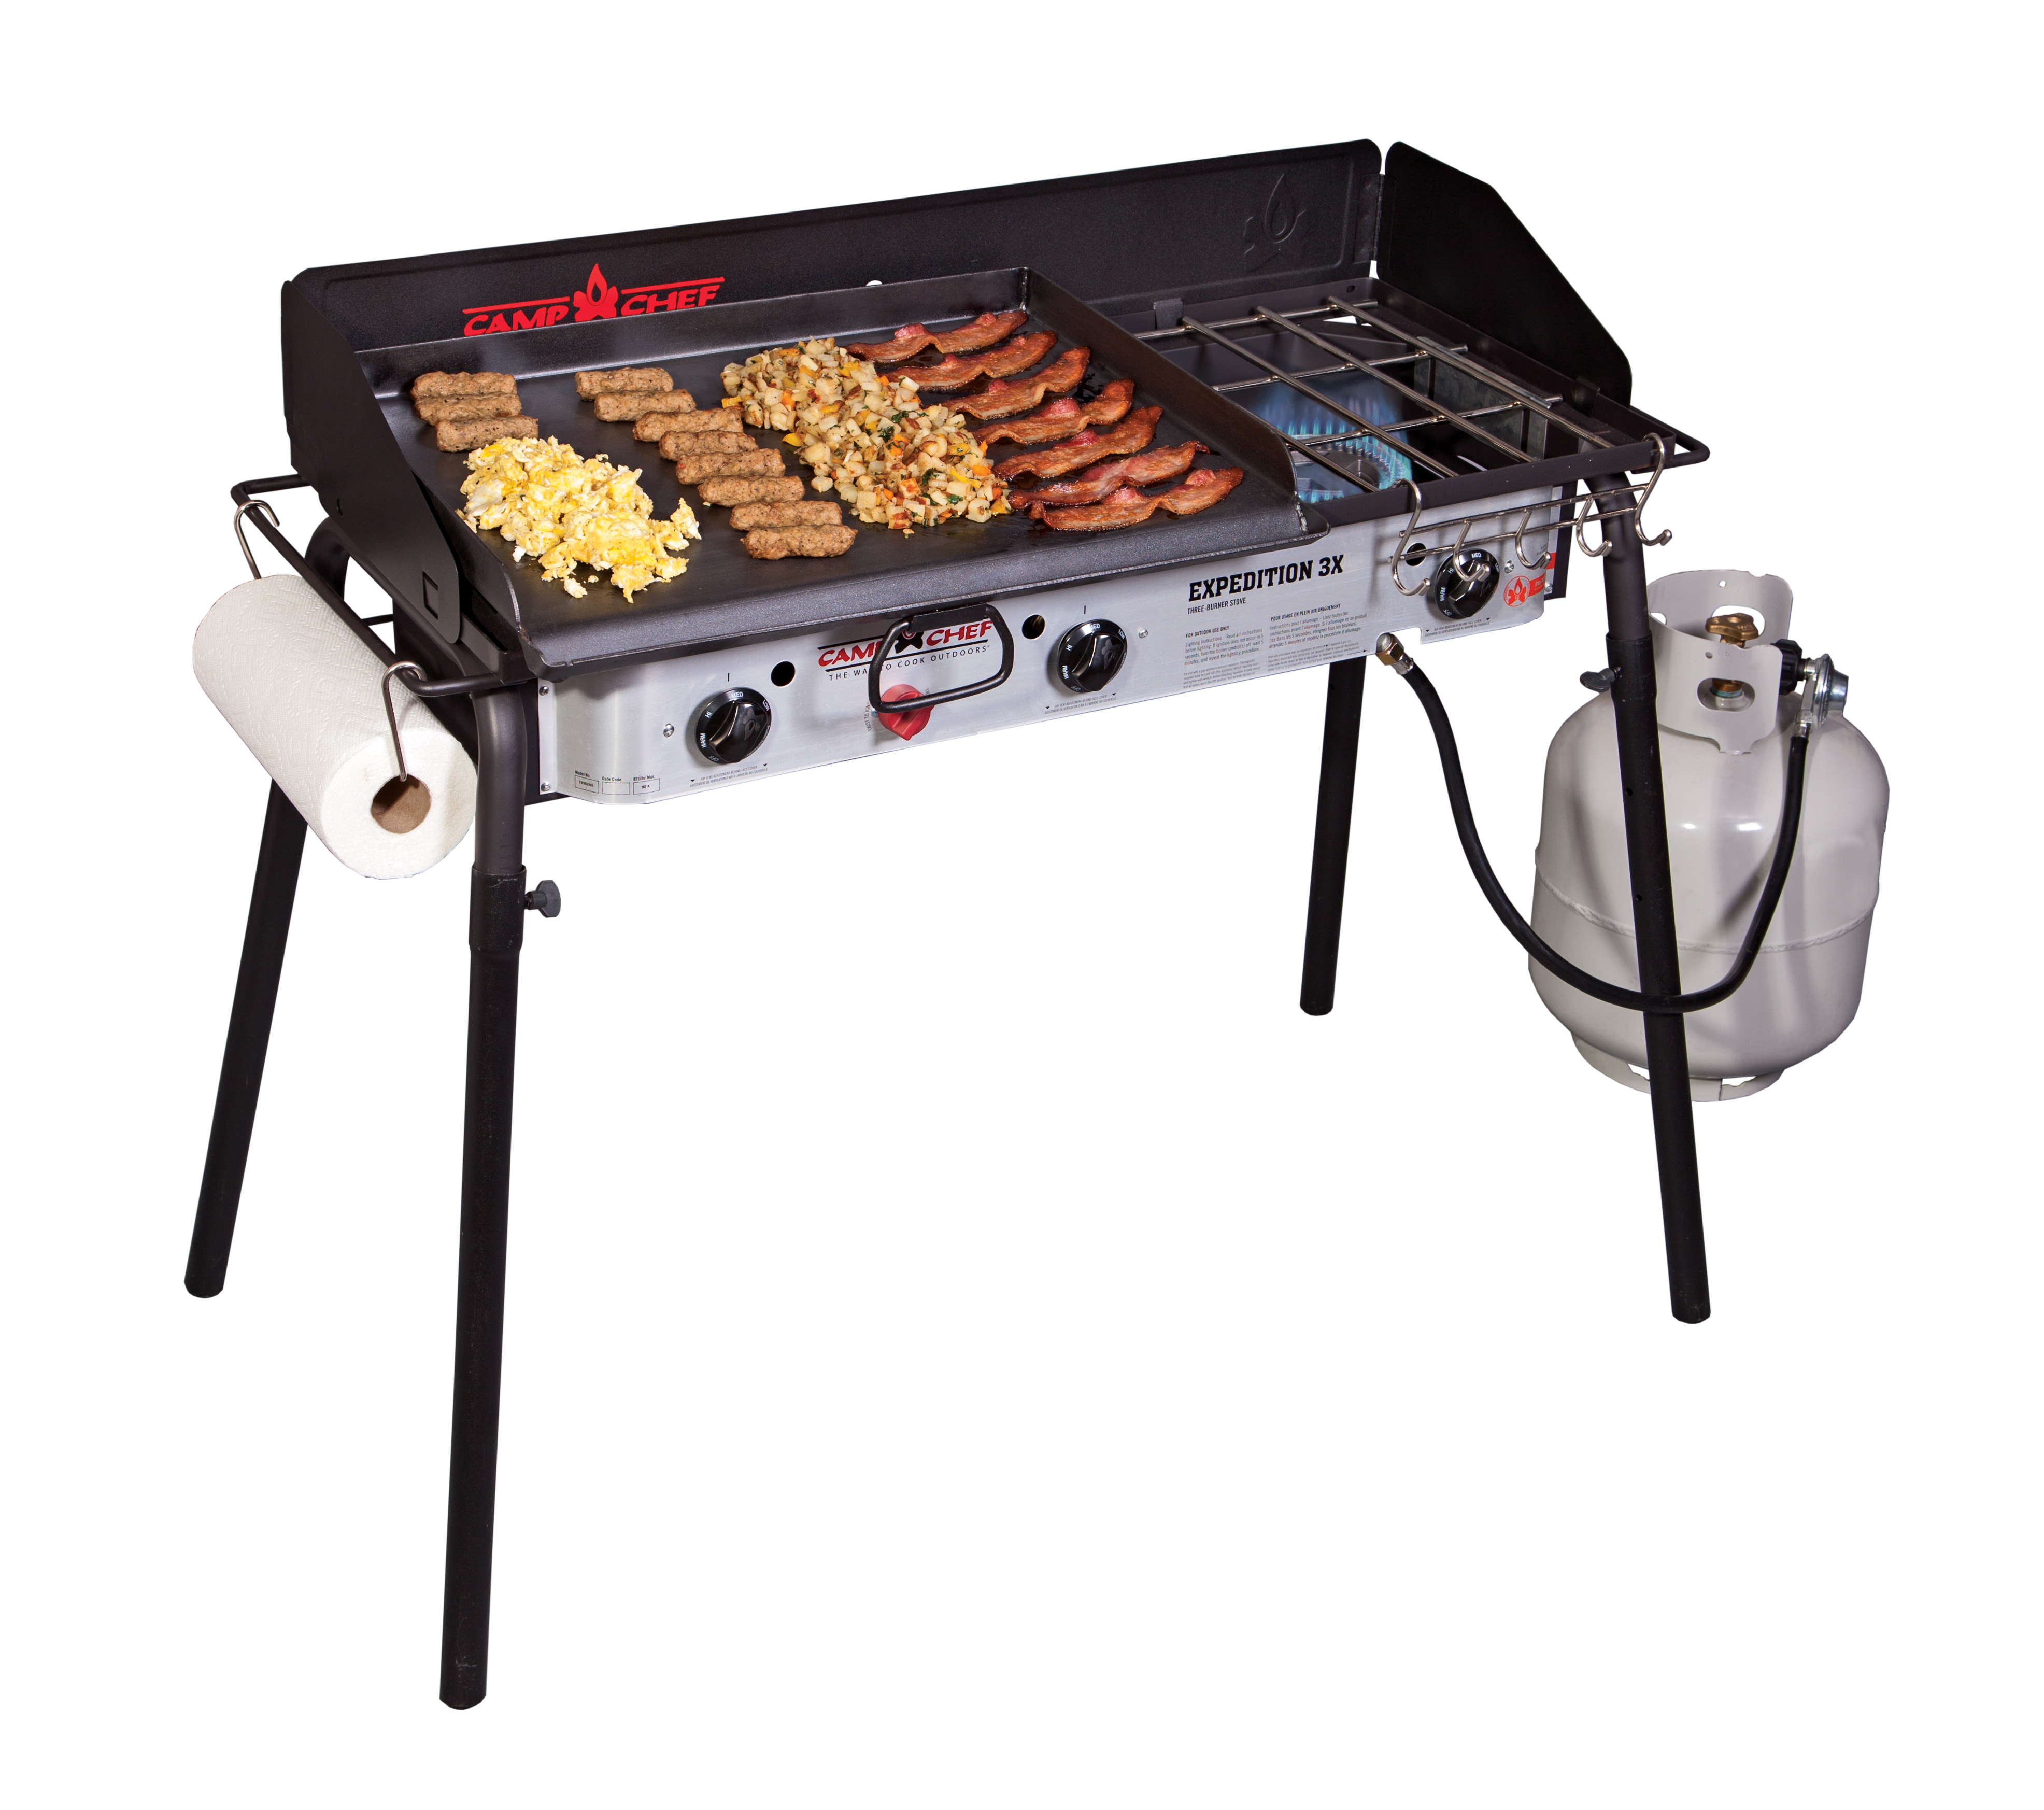 Camp Chef Expedition 3X Stove with 18"x24" Griddle - 3 Burners at 30,000 BTUs Each, TB90LWG - image 4 of 13